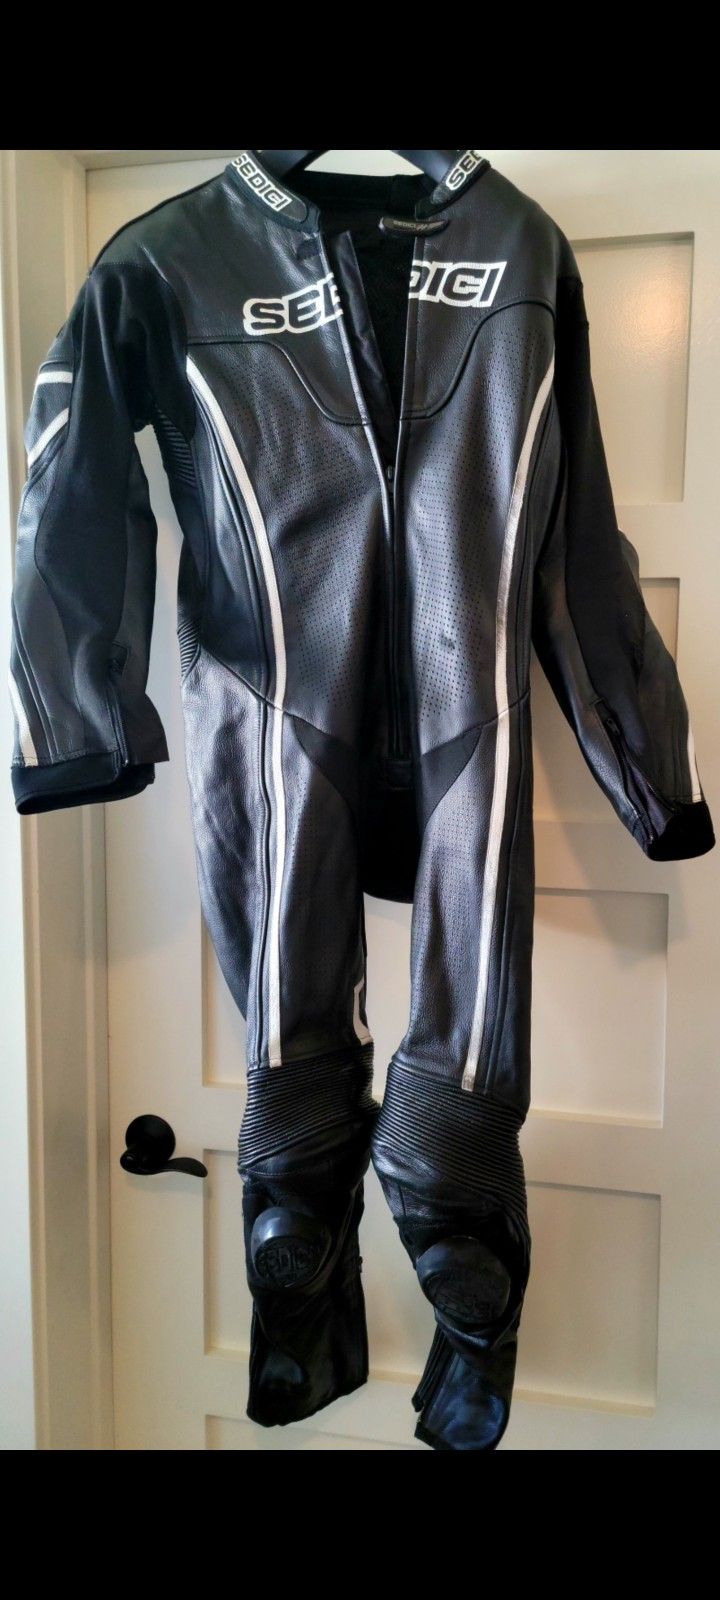 Sedici Motorcycle Leather Track Suit